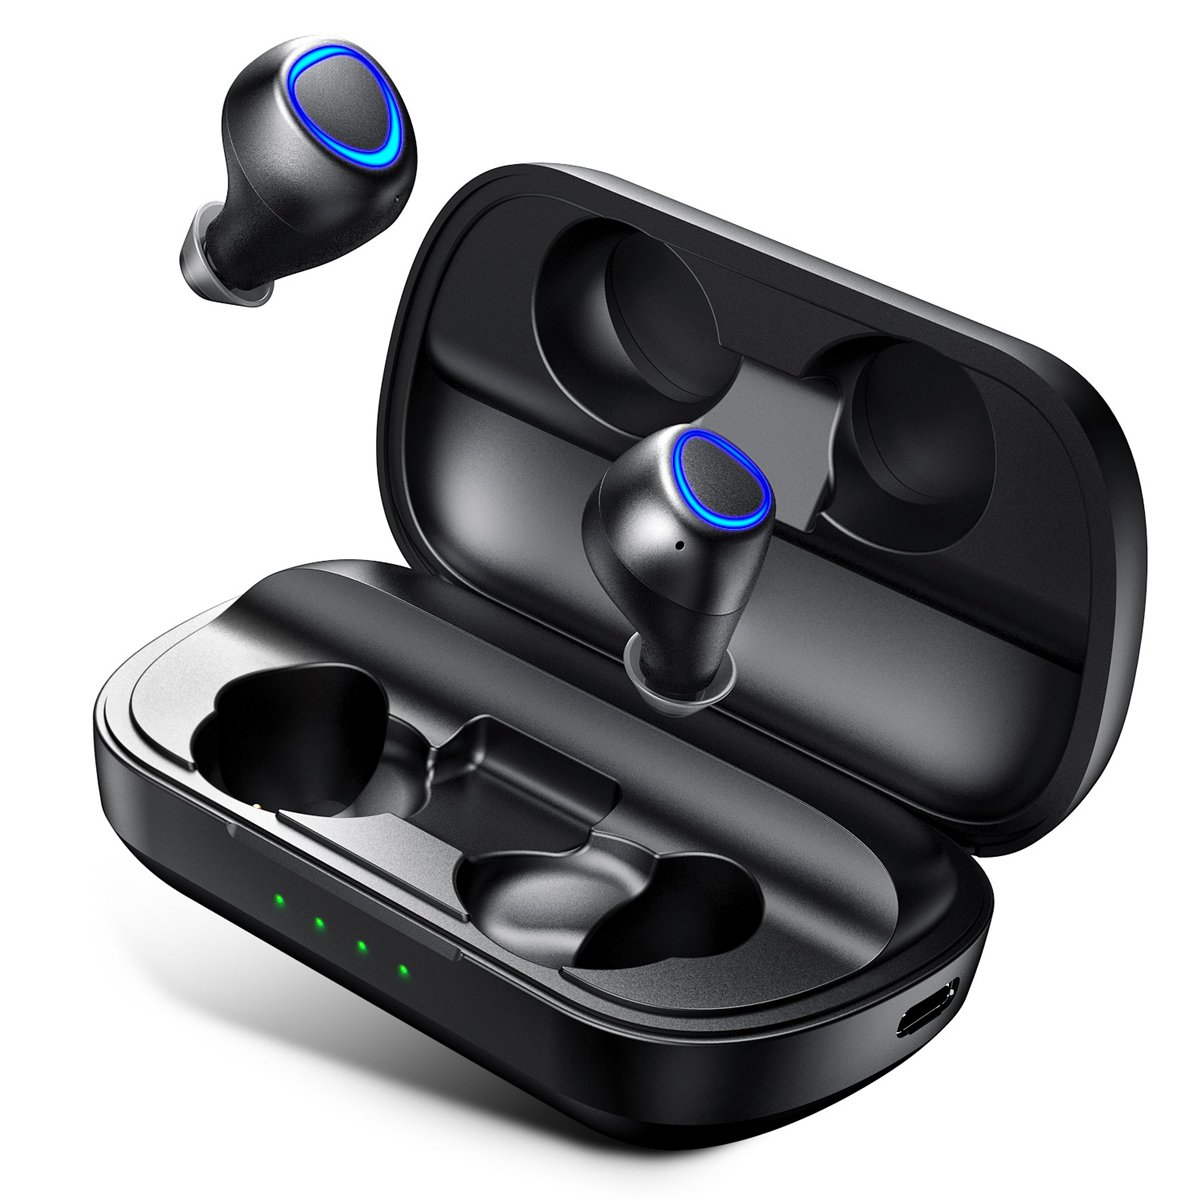 [bluetooth 5.0] ANOMOIBUDS TWS Wireless Earbuds 10W QI Wireless Charging 2600mAH DSP Noise Cancellin